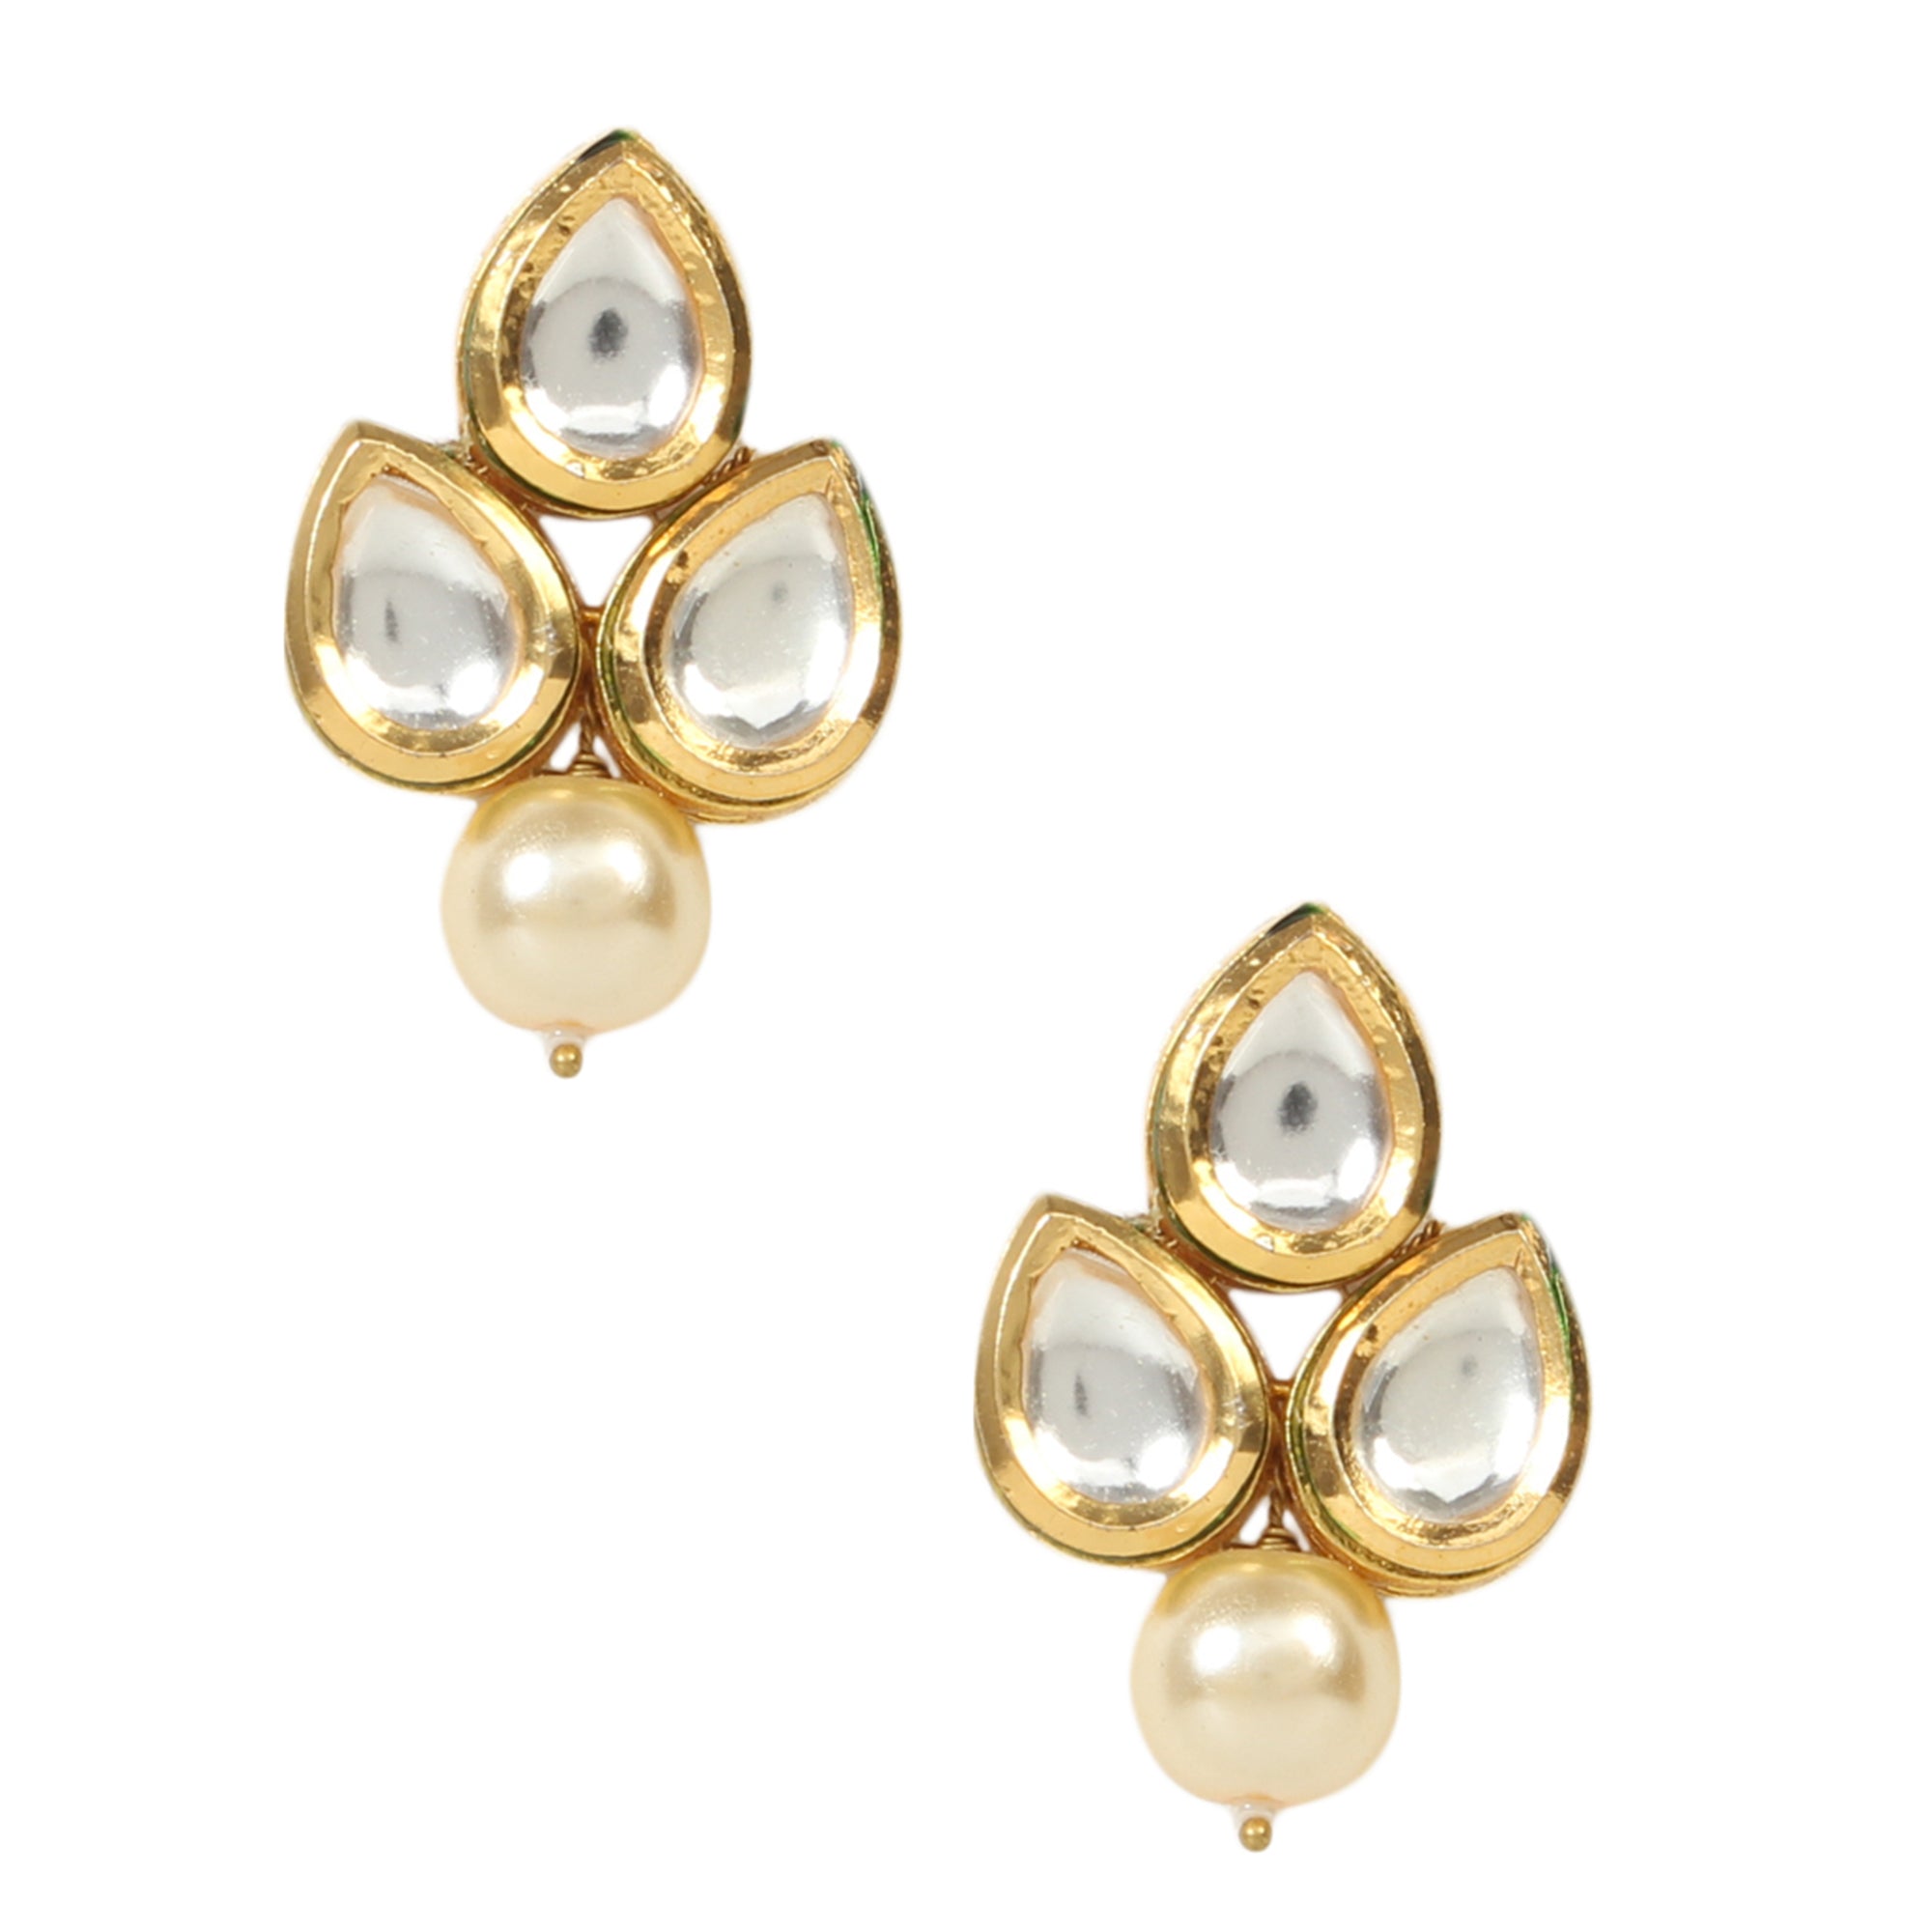 Gold toned Kundan earrings with pearls